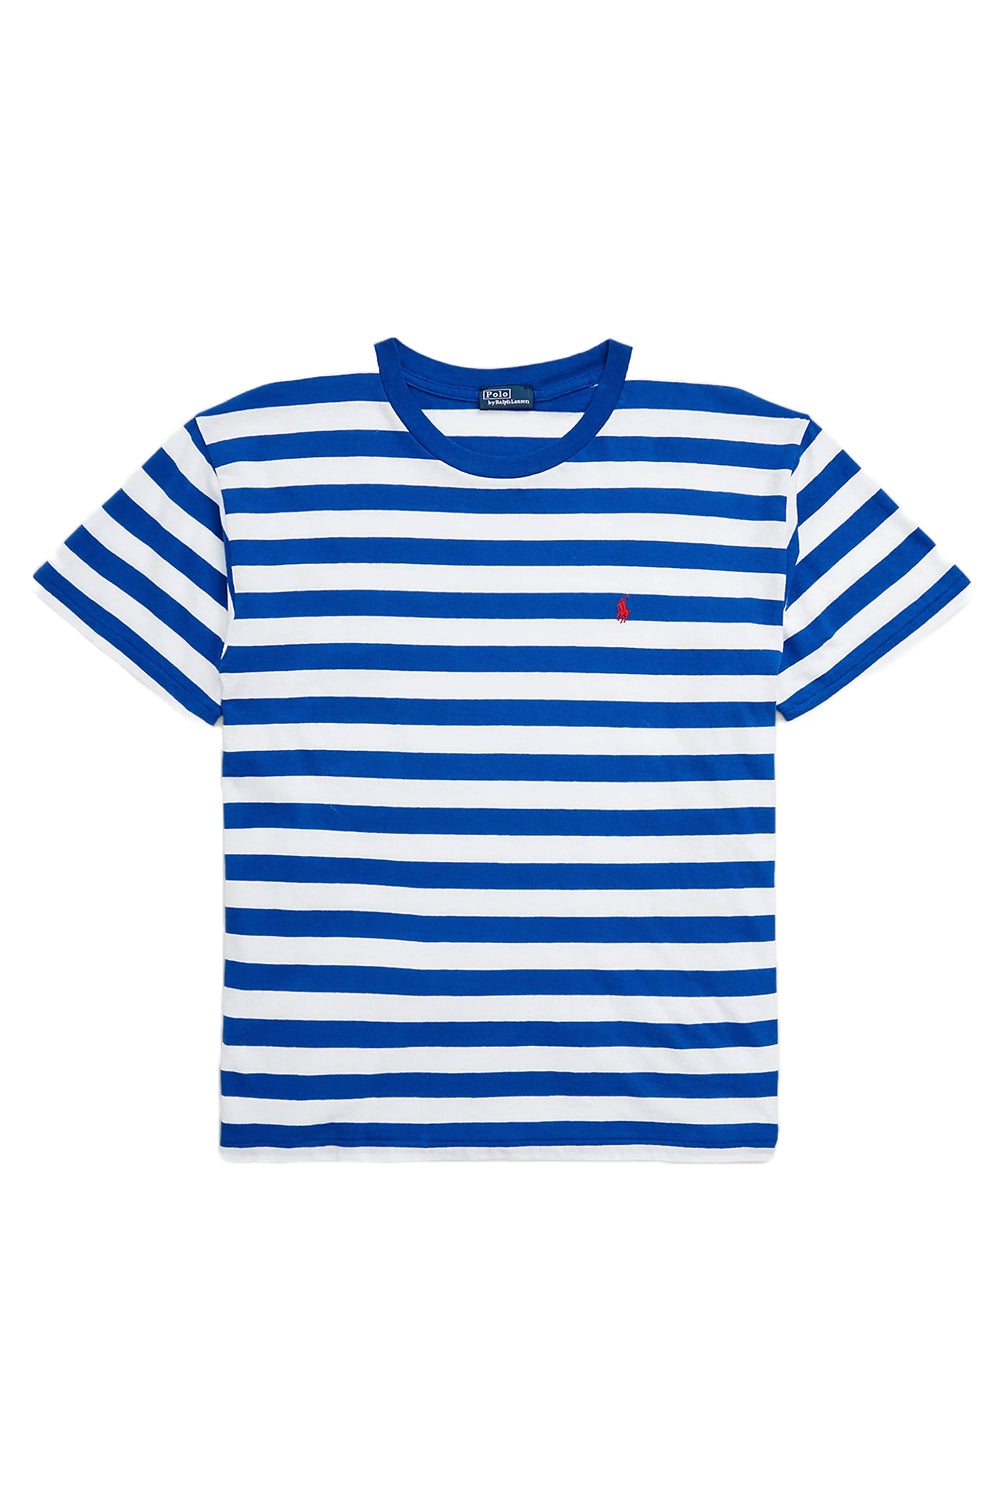 Image of POLO RALPH LAUREN T-shirt girocollo a righe in jersey